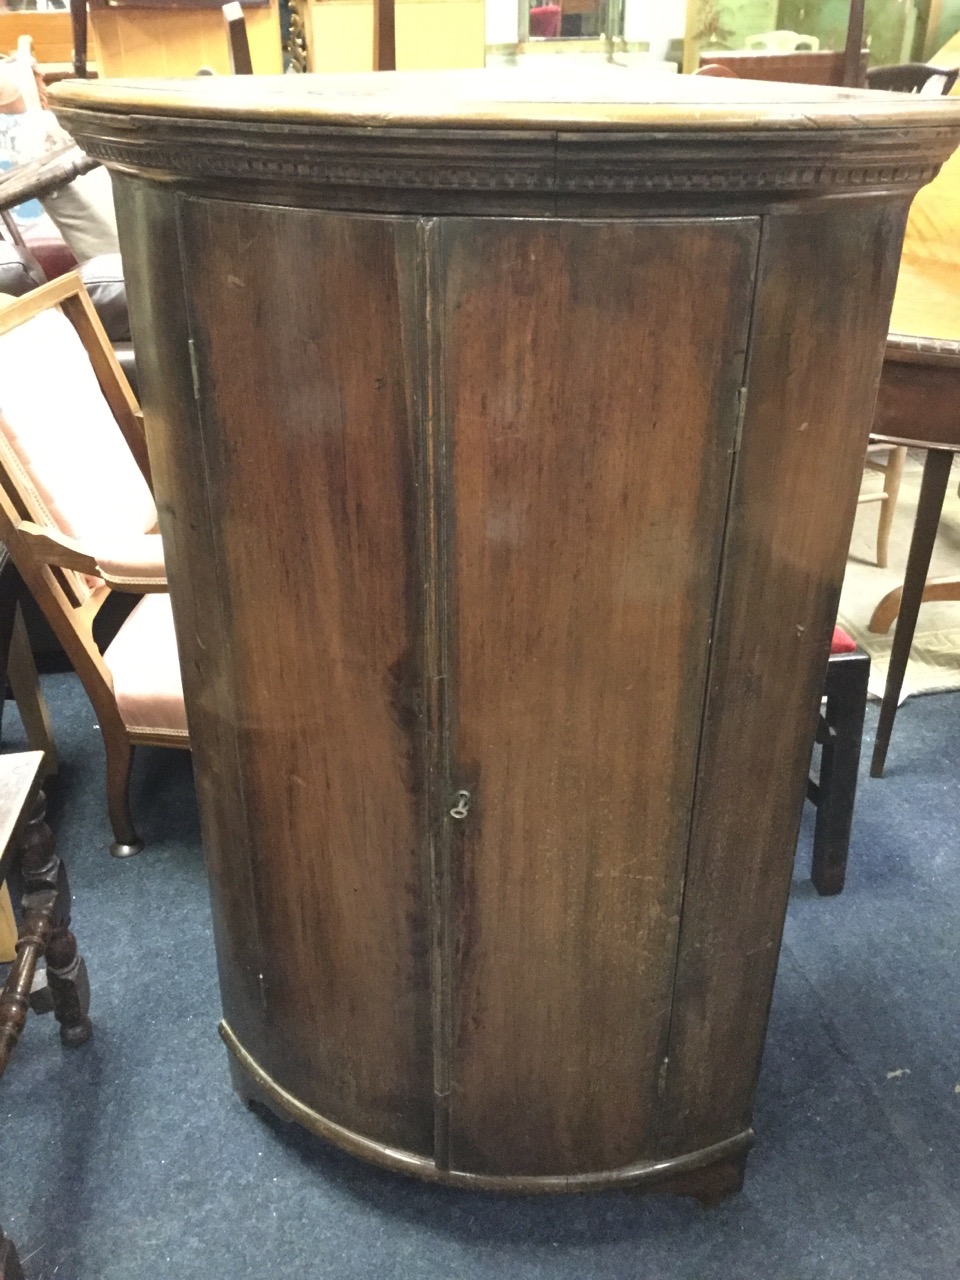 A barrel fronted nineteenth century mahogany corner cabinet with moulded dentil cornice above two